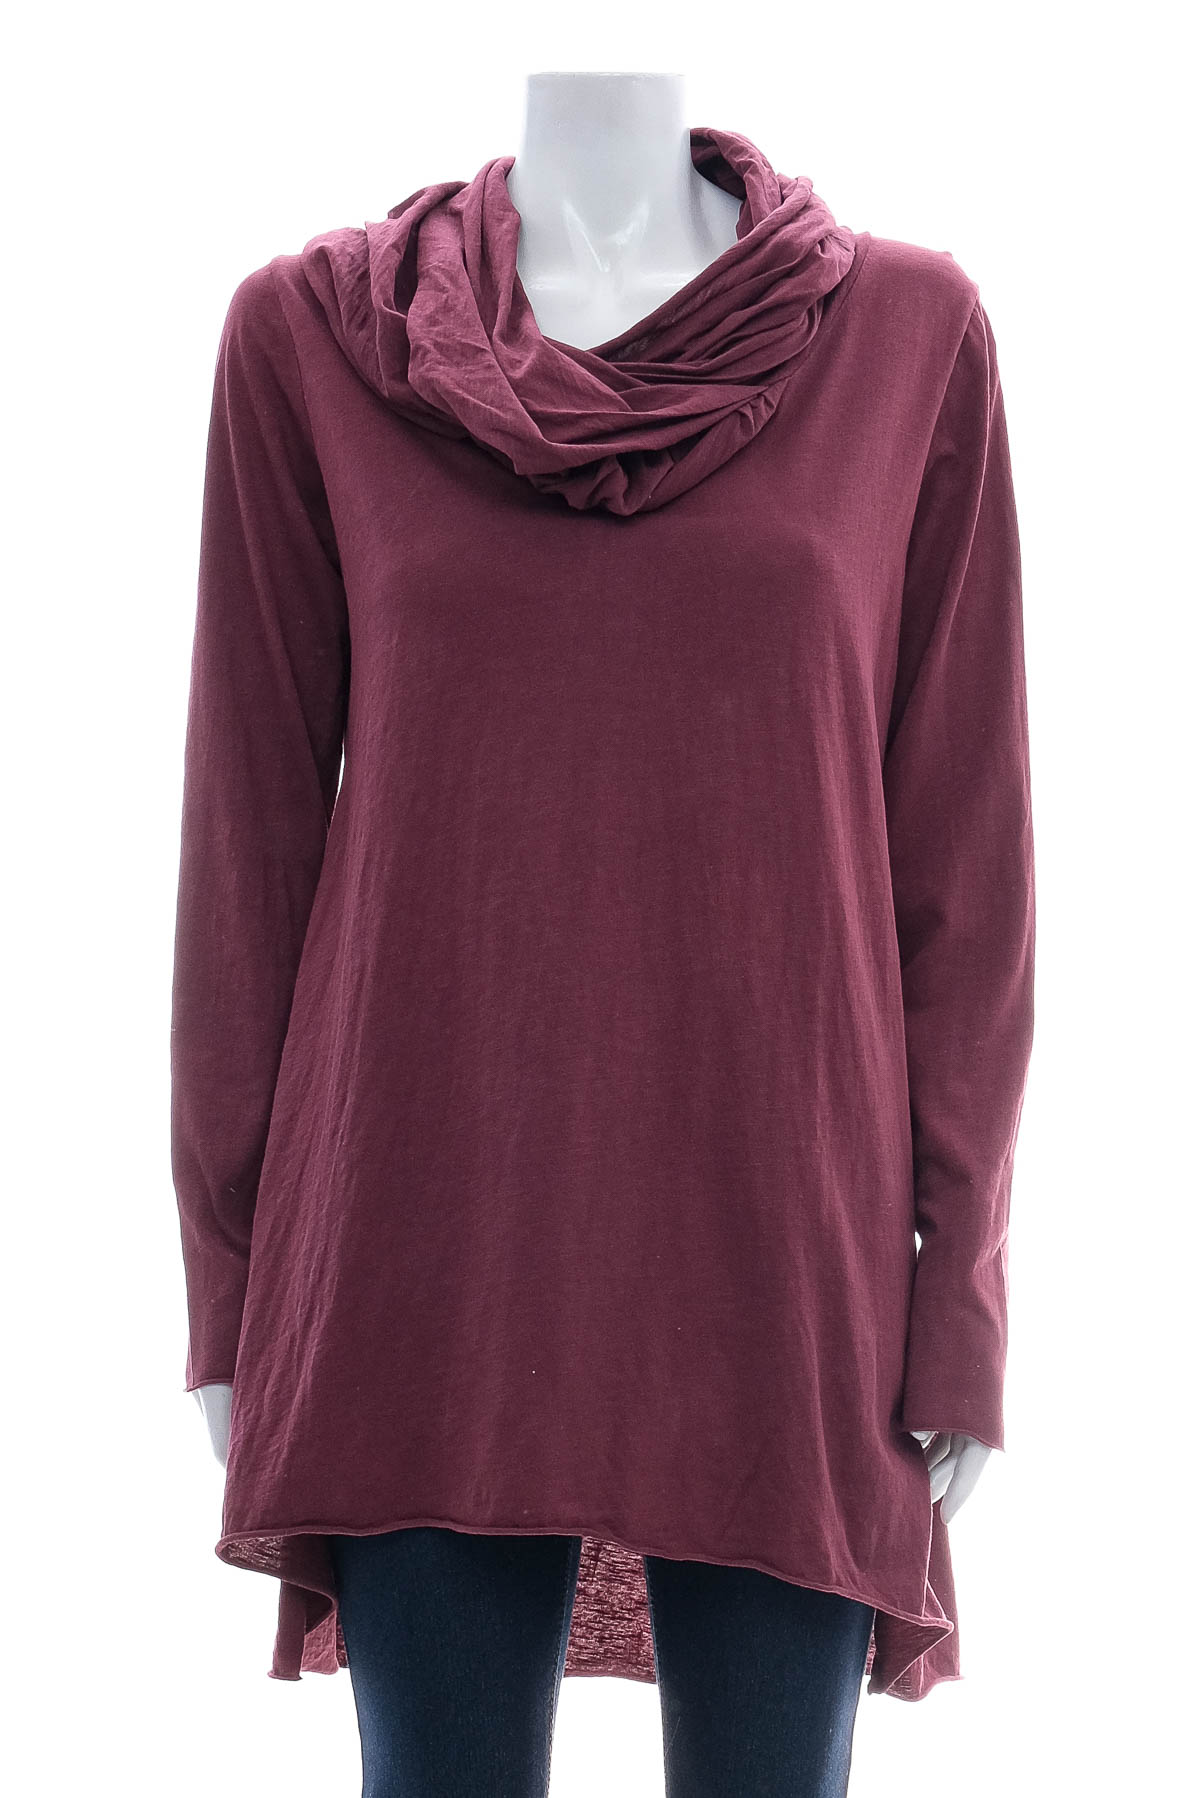 Women's tunic - Made in Italy - 0